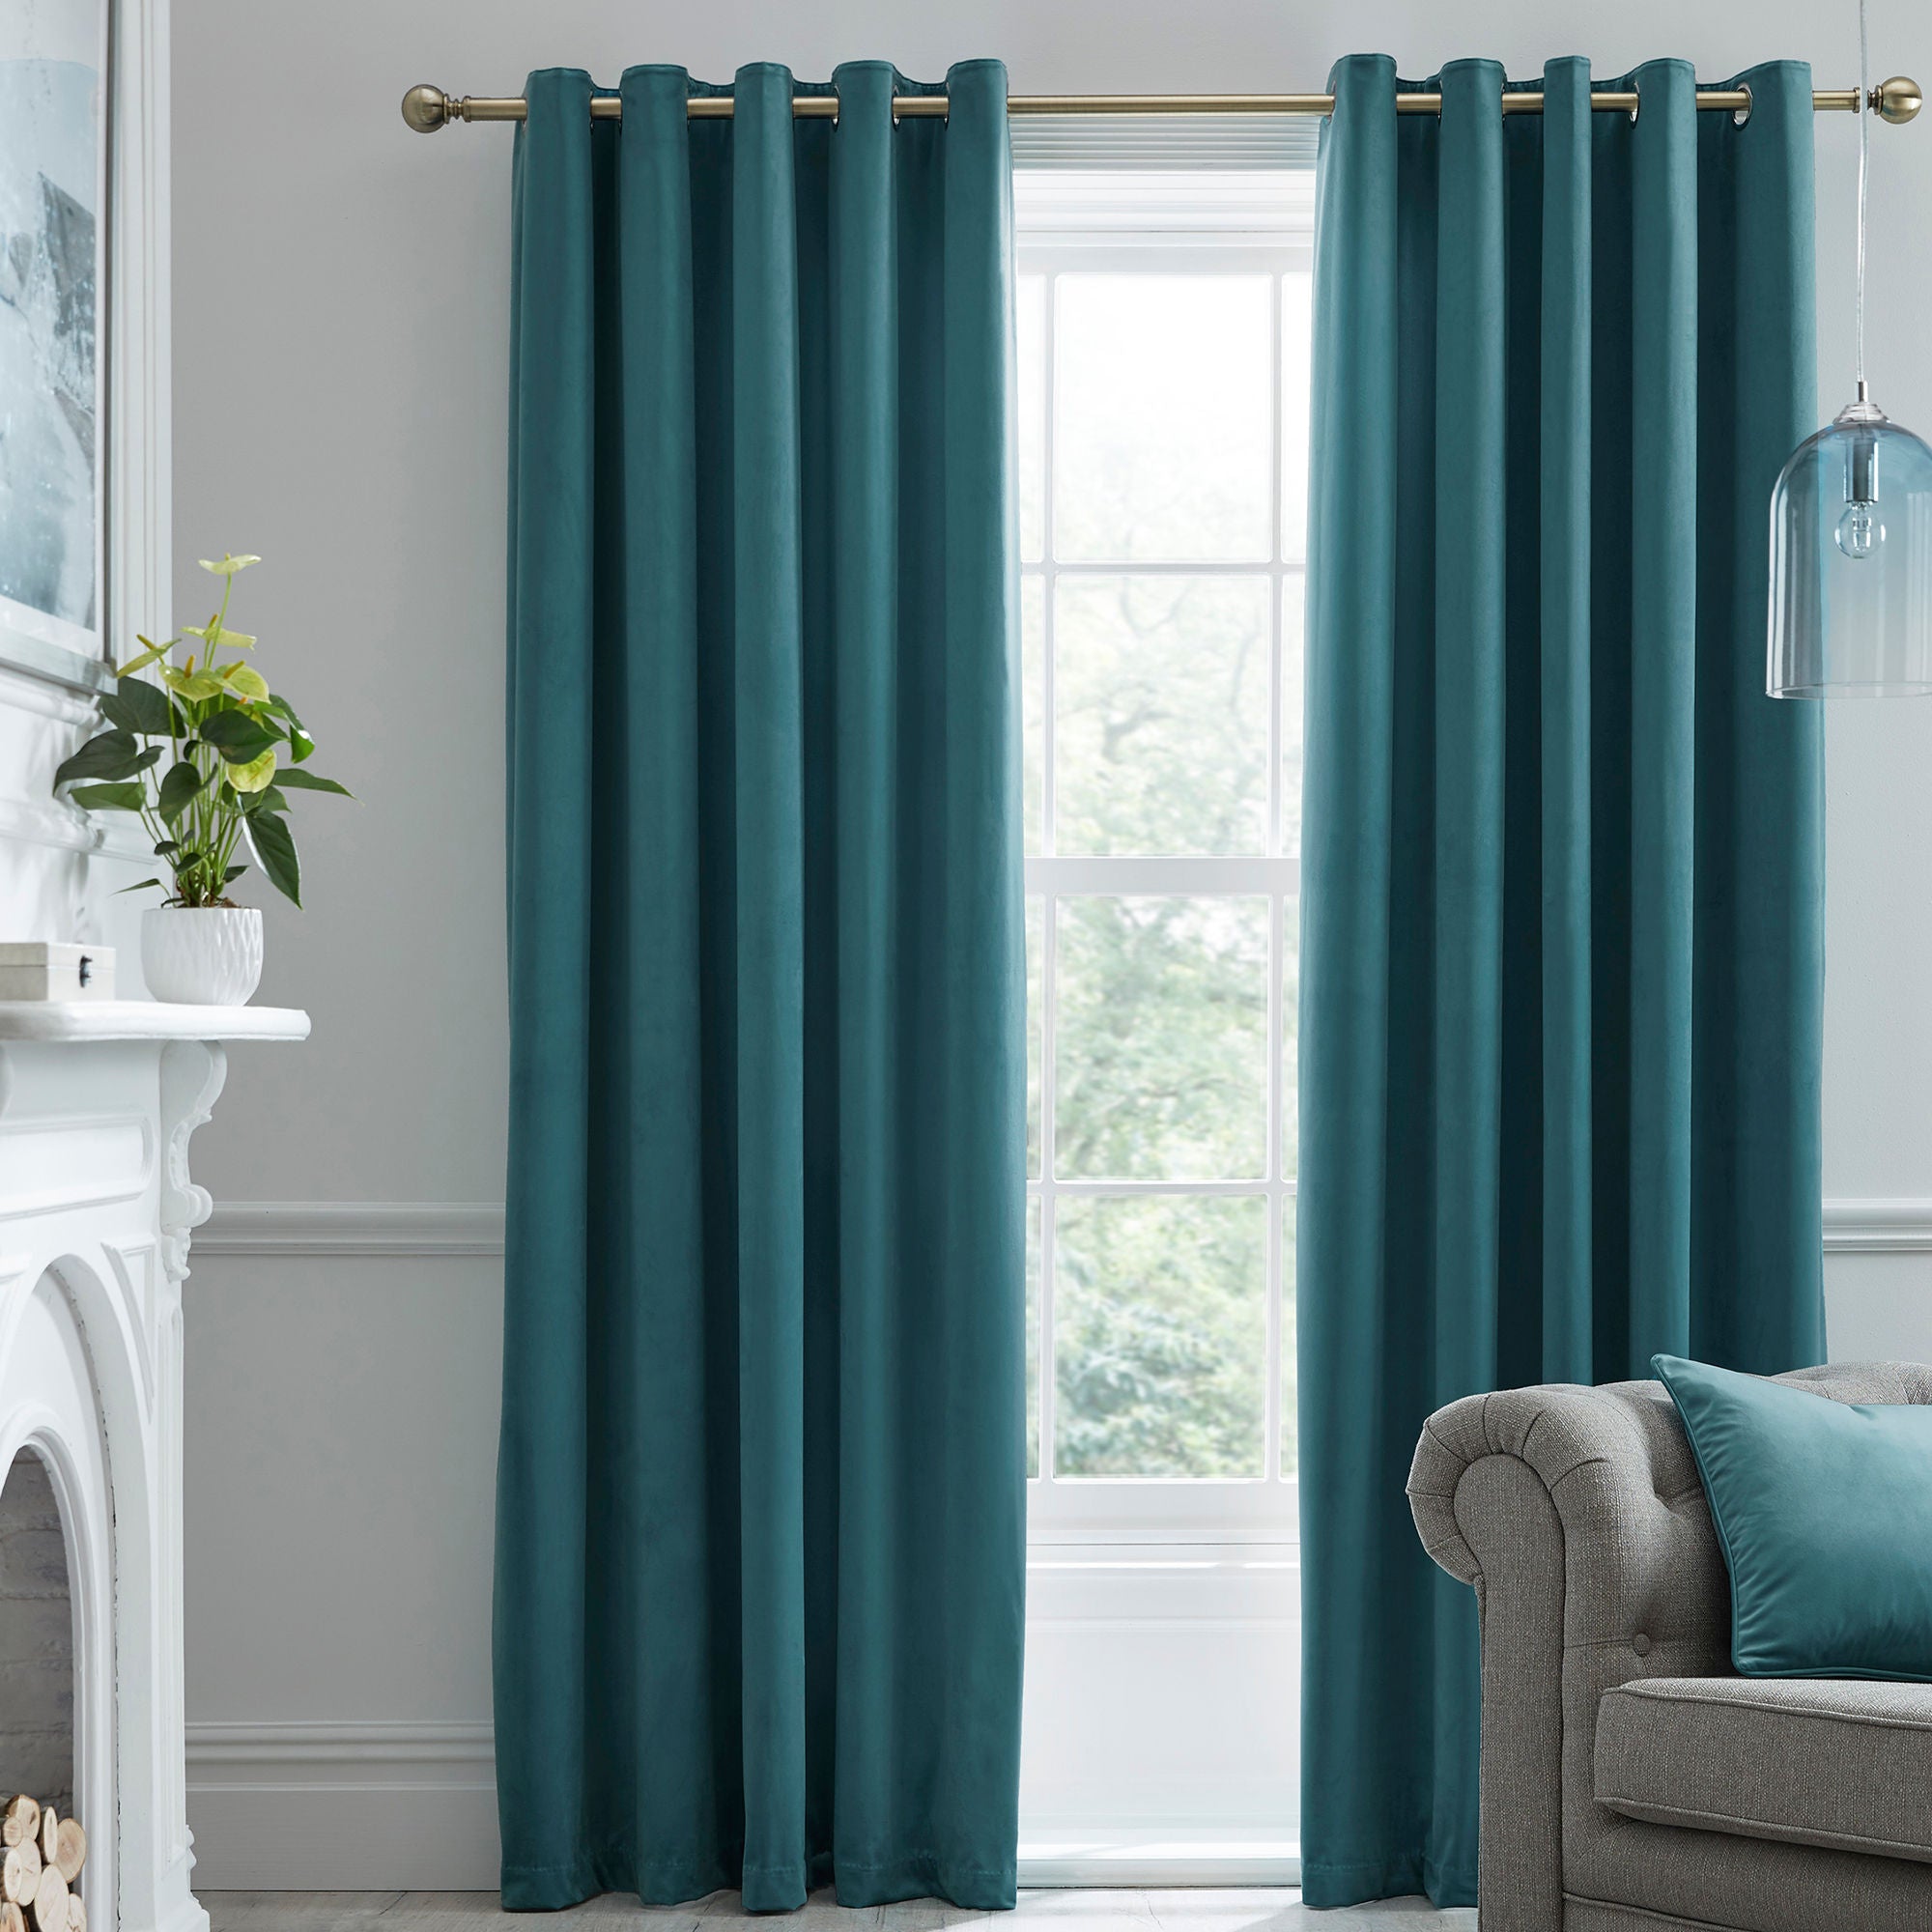 Montrose Pair of Eyelet Curtains by Laurence Llewelyn-Bowen in Teal - Pair of Eyelet Curtains - Laurence Llewelyn-Bowen